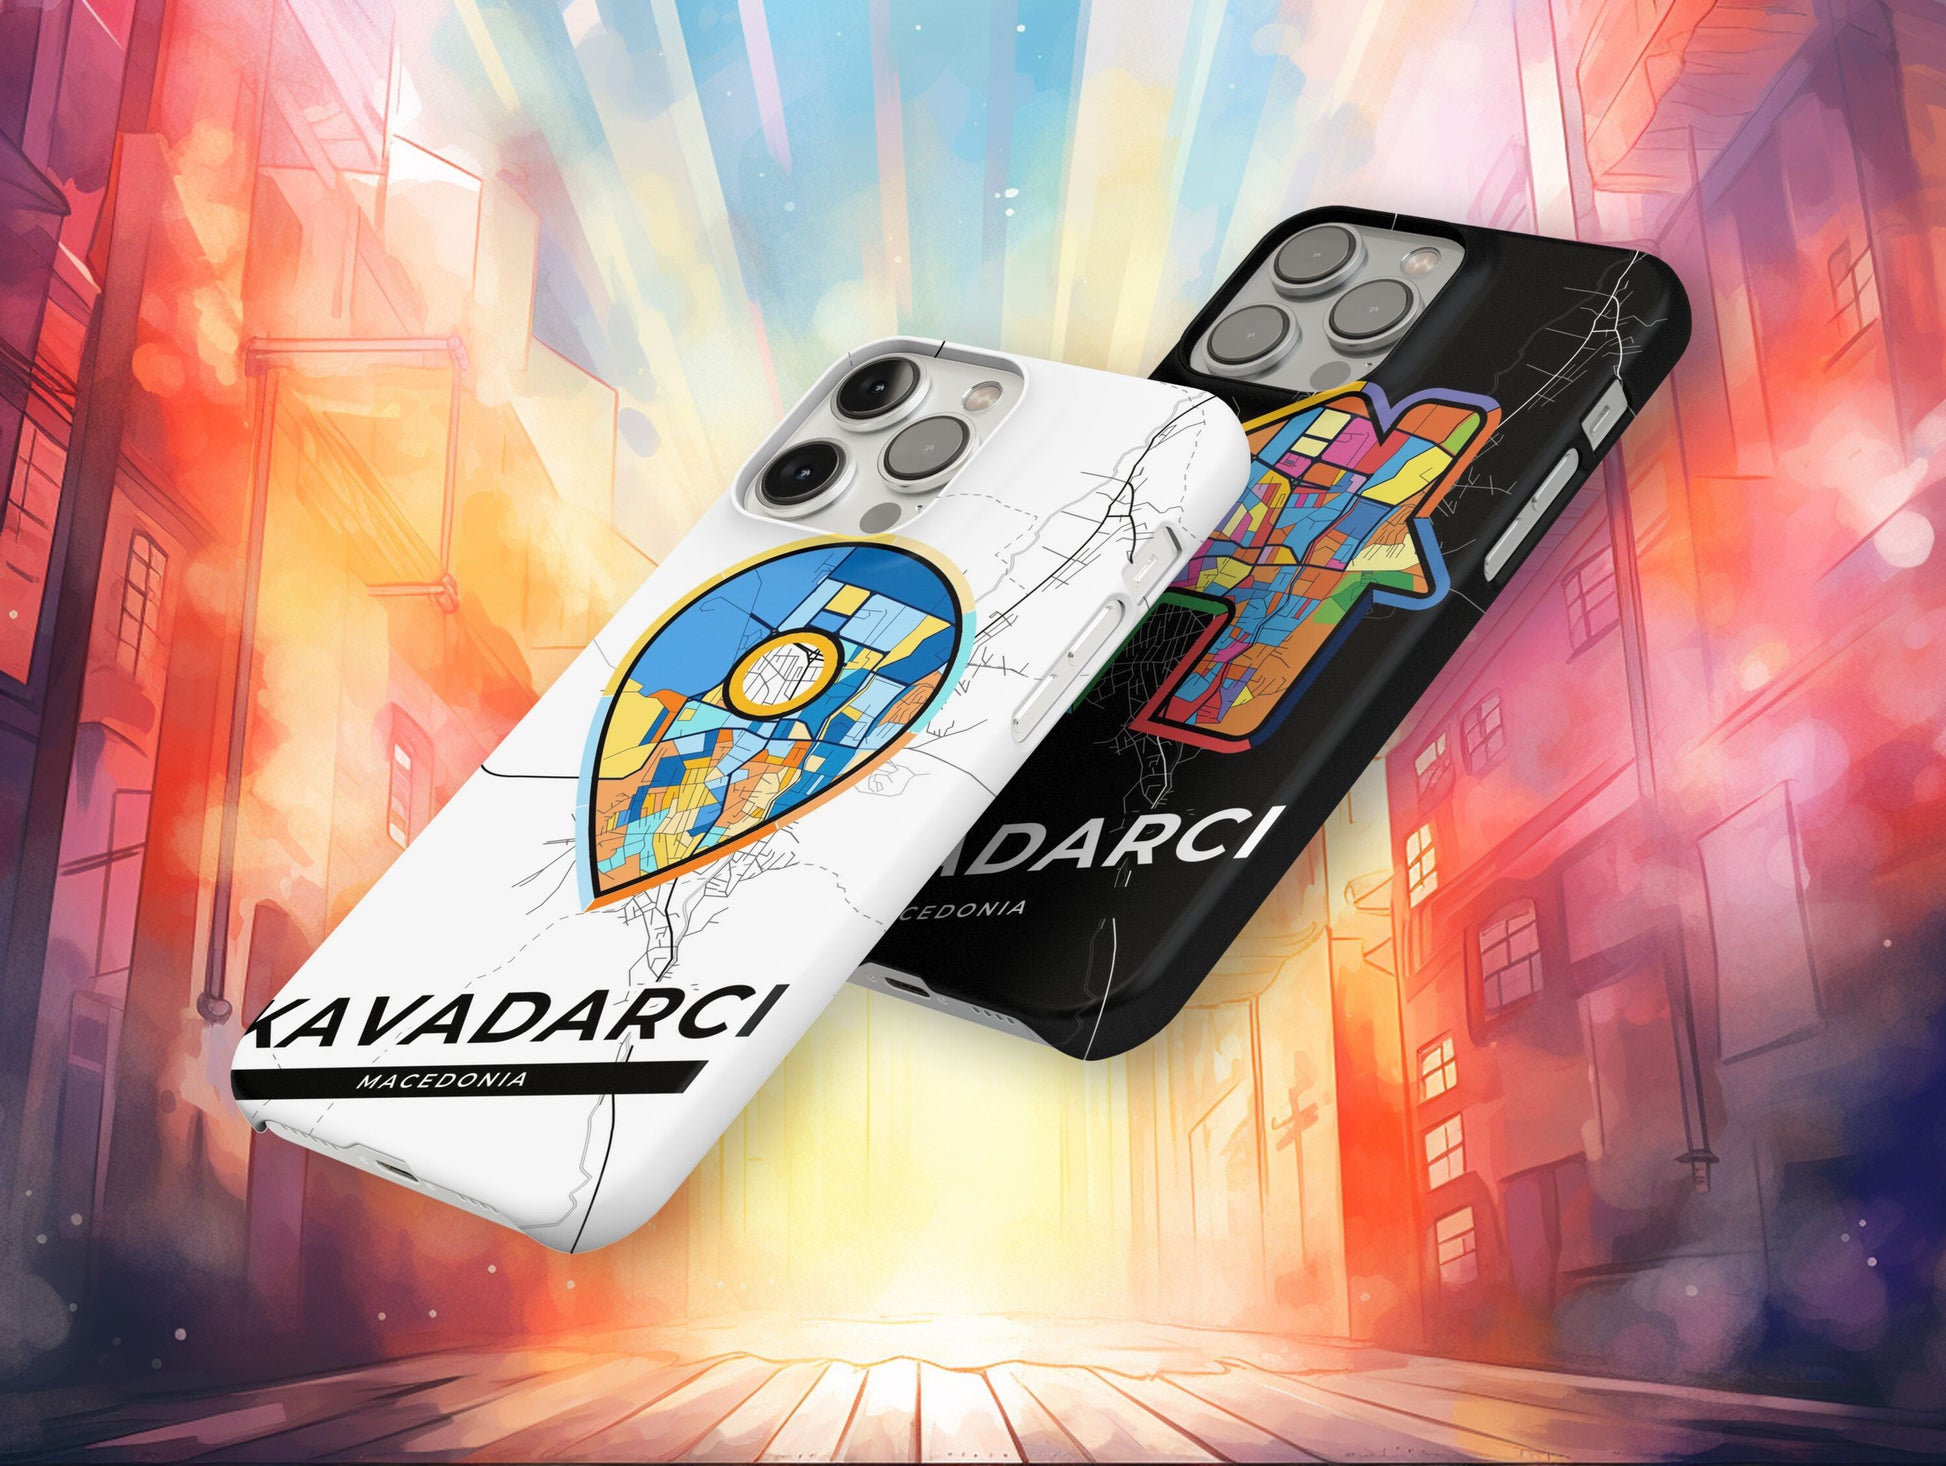 Kavadarci North Macedonia slim phone case with colorful icon. Birthday, wedding or housewarming gift. Couple match cases.